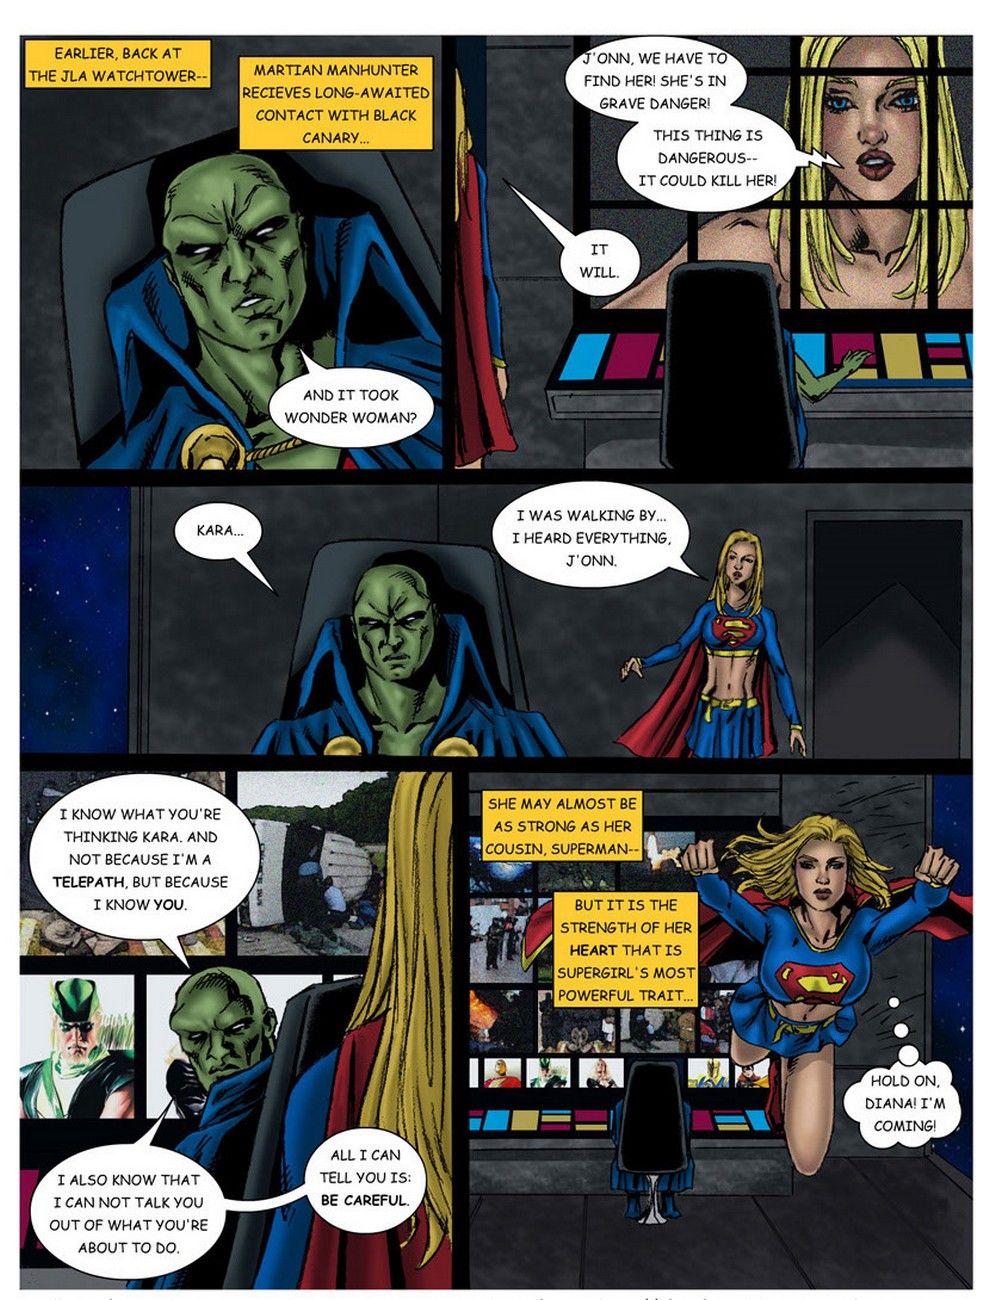 Wonder Woman - In The Clutches Of The Prâ€¦ - part 2 page 1